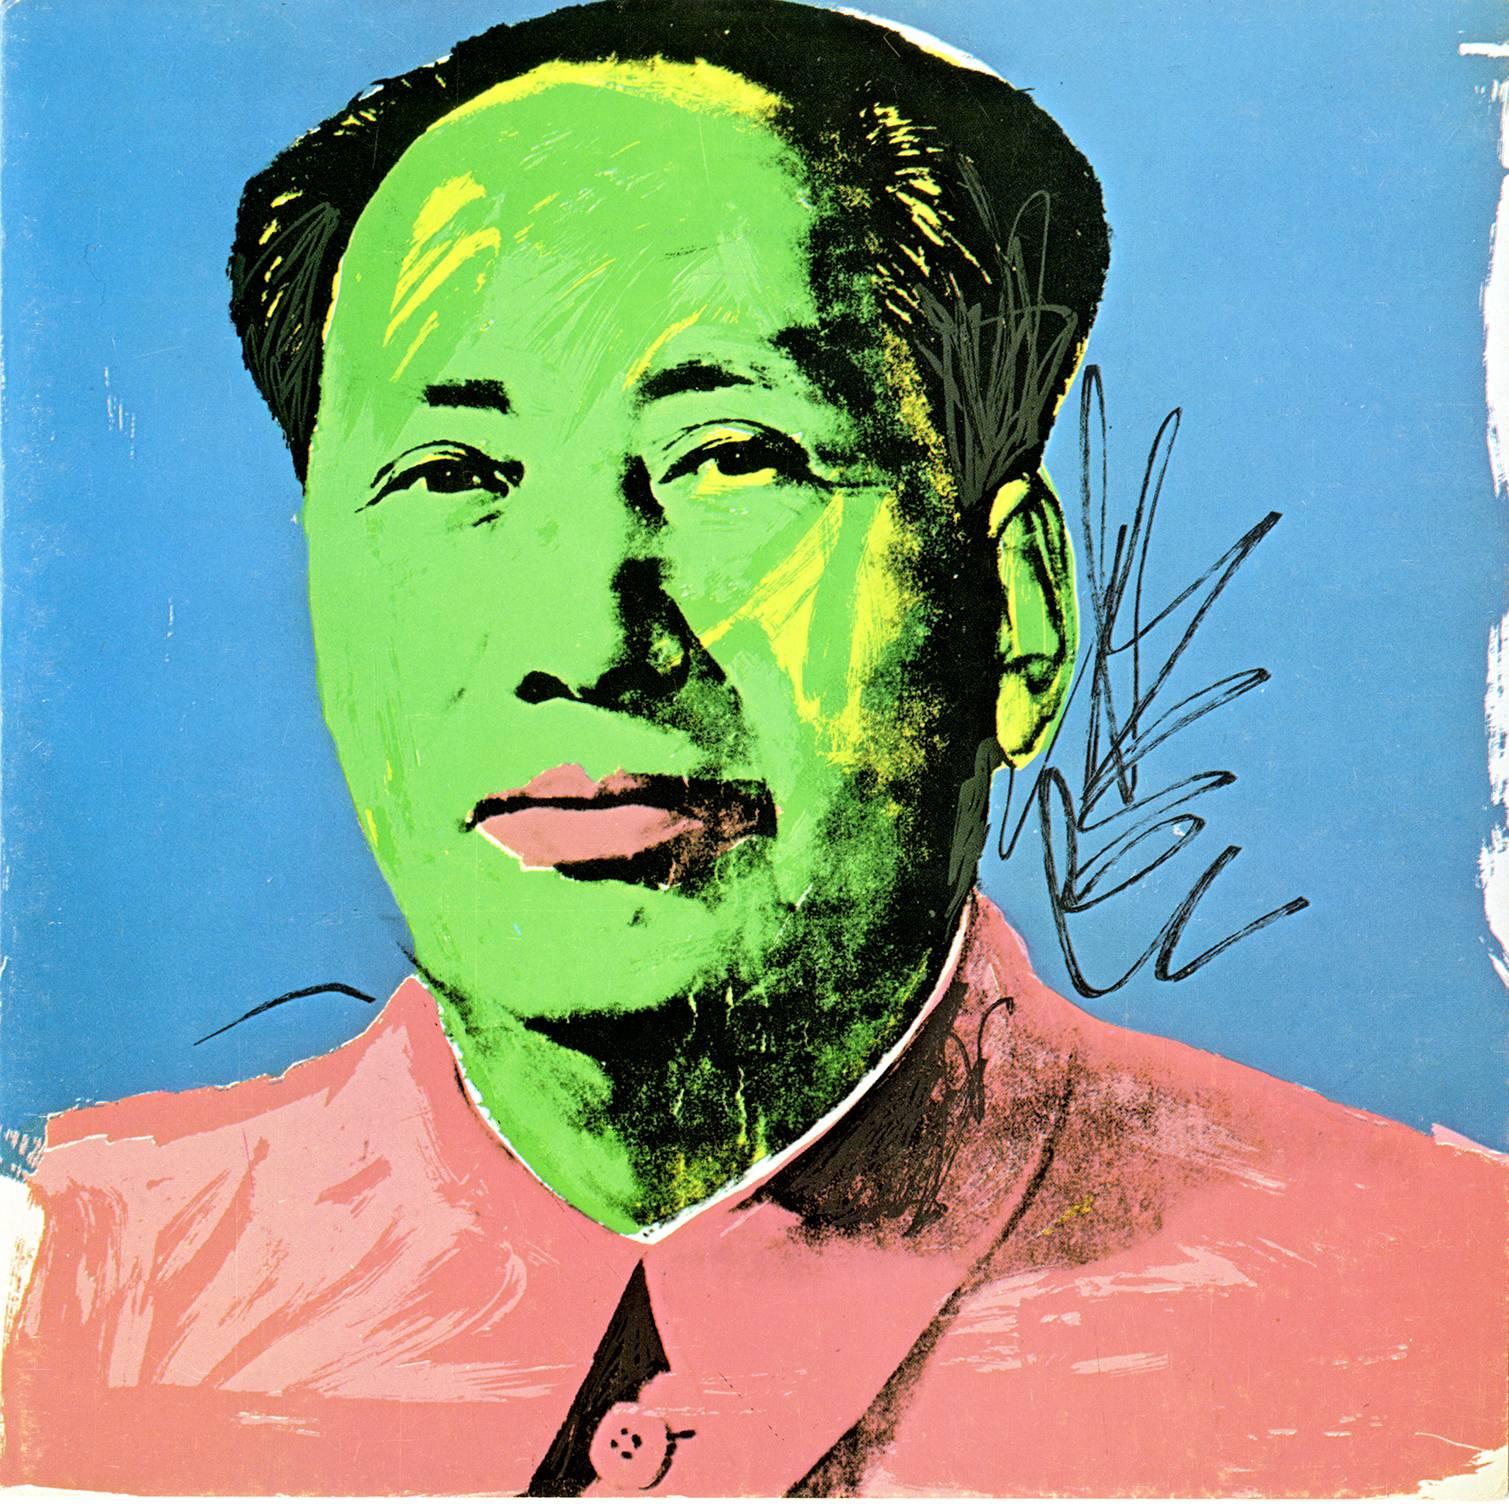 Andy Warhol Mao 1972 announcement (Andy Warhol Leo Castelli gallery)  - Art de (after) Andy Warhol